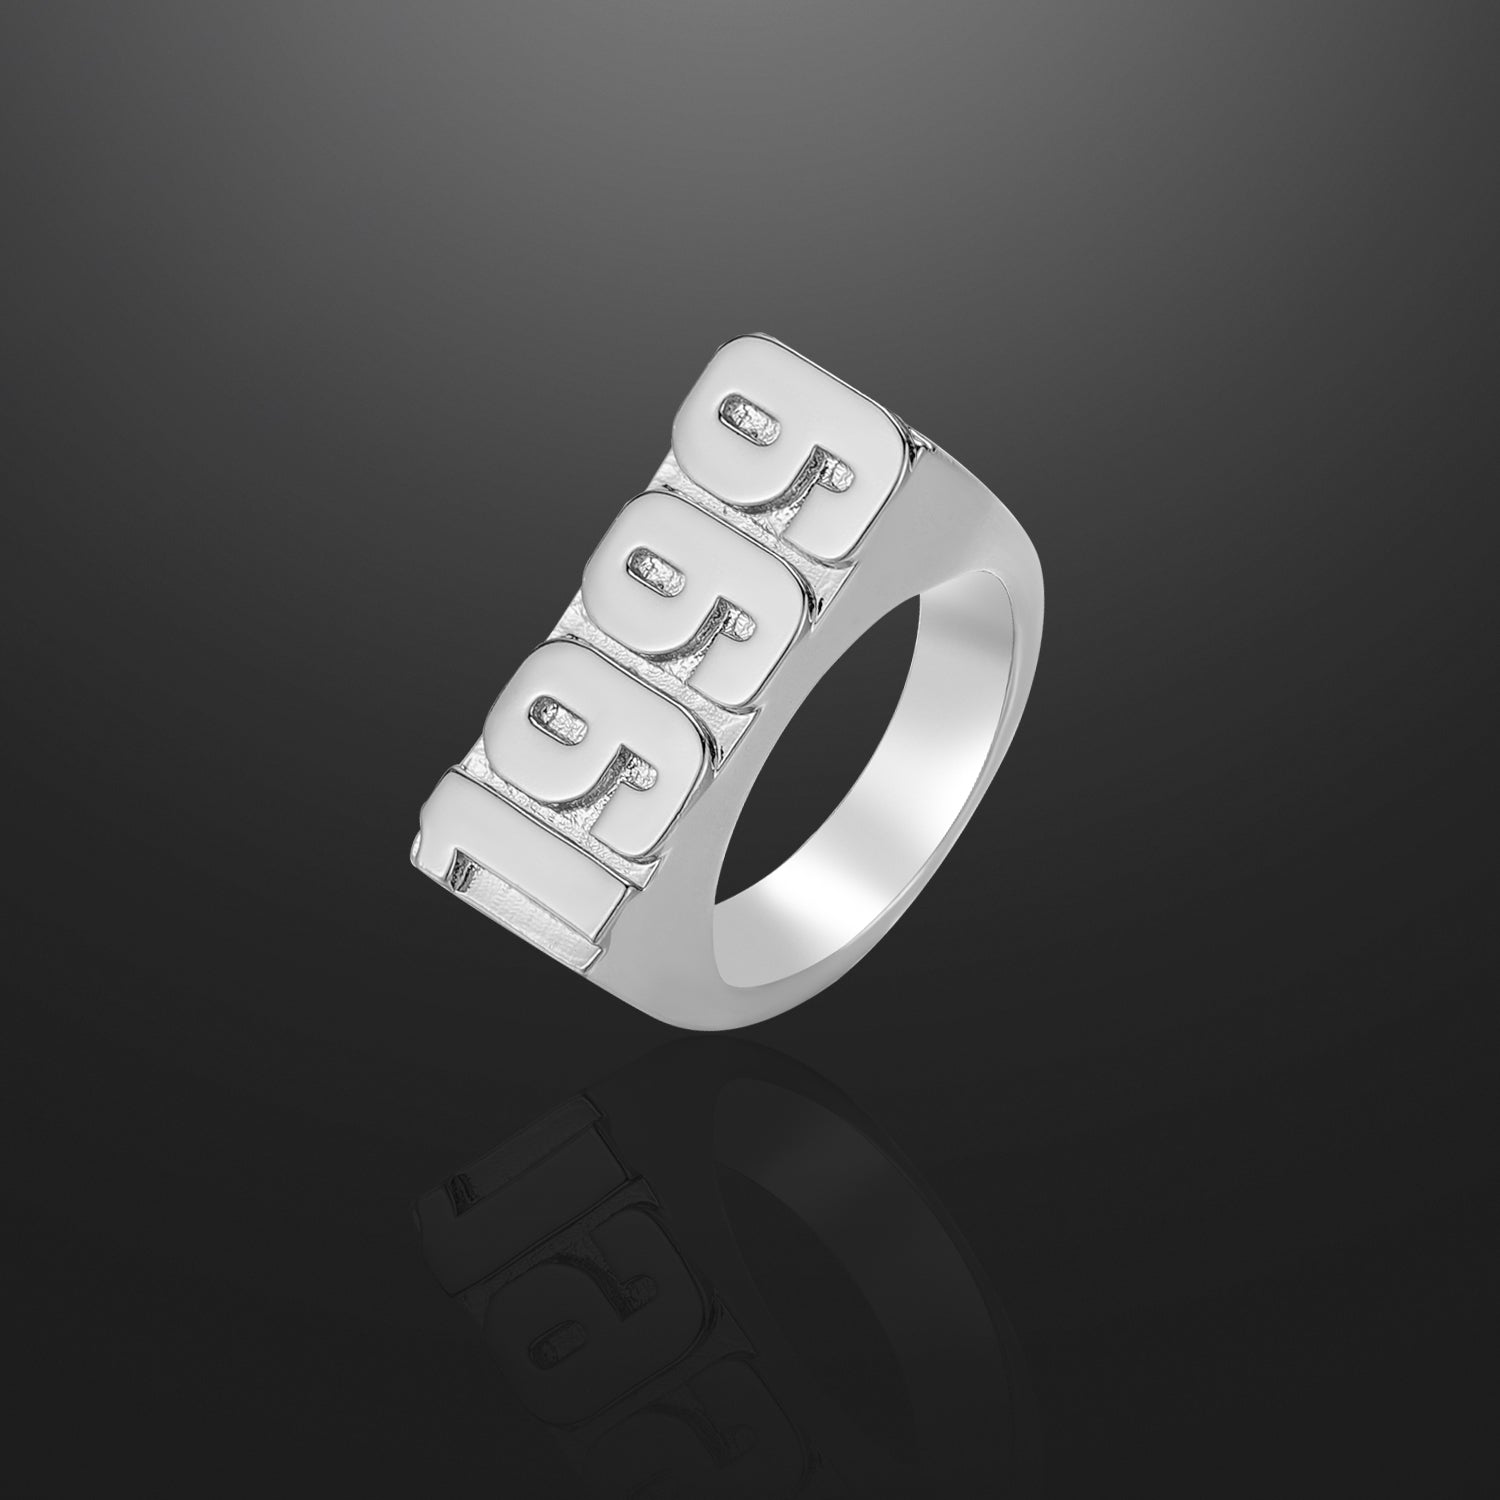 3D Year Ring